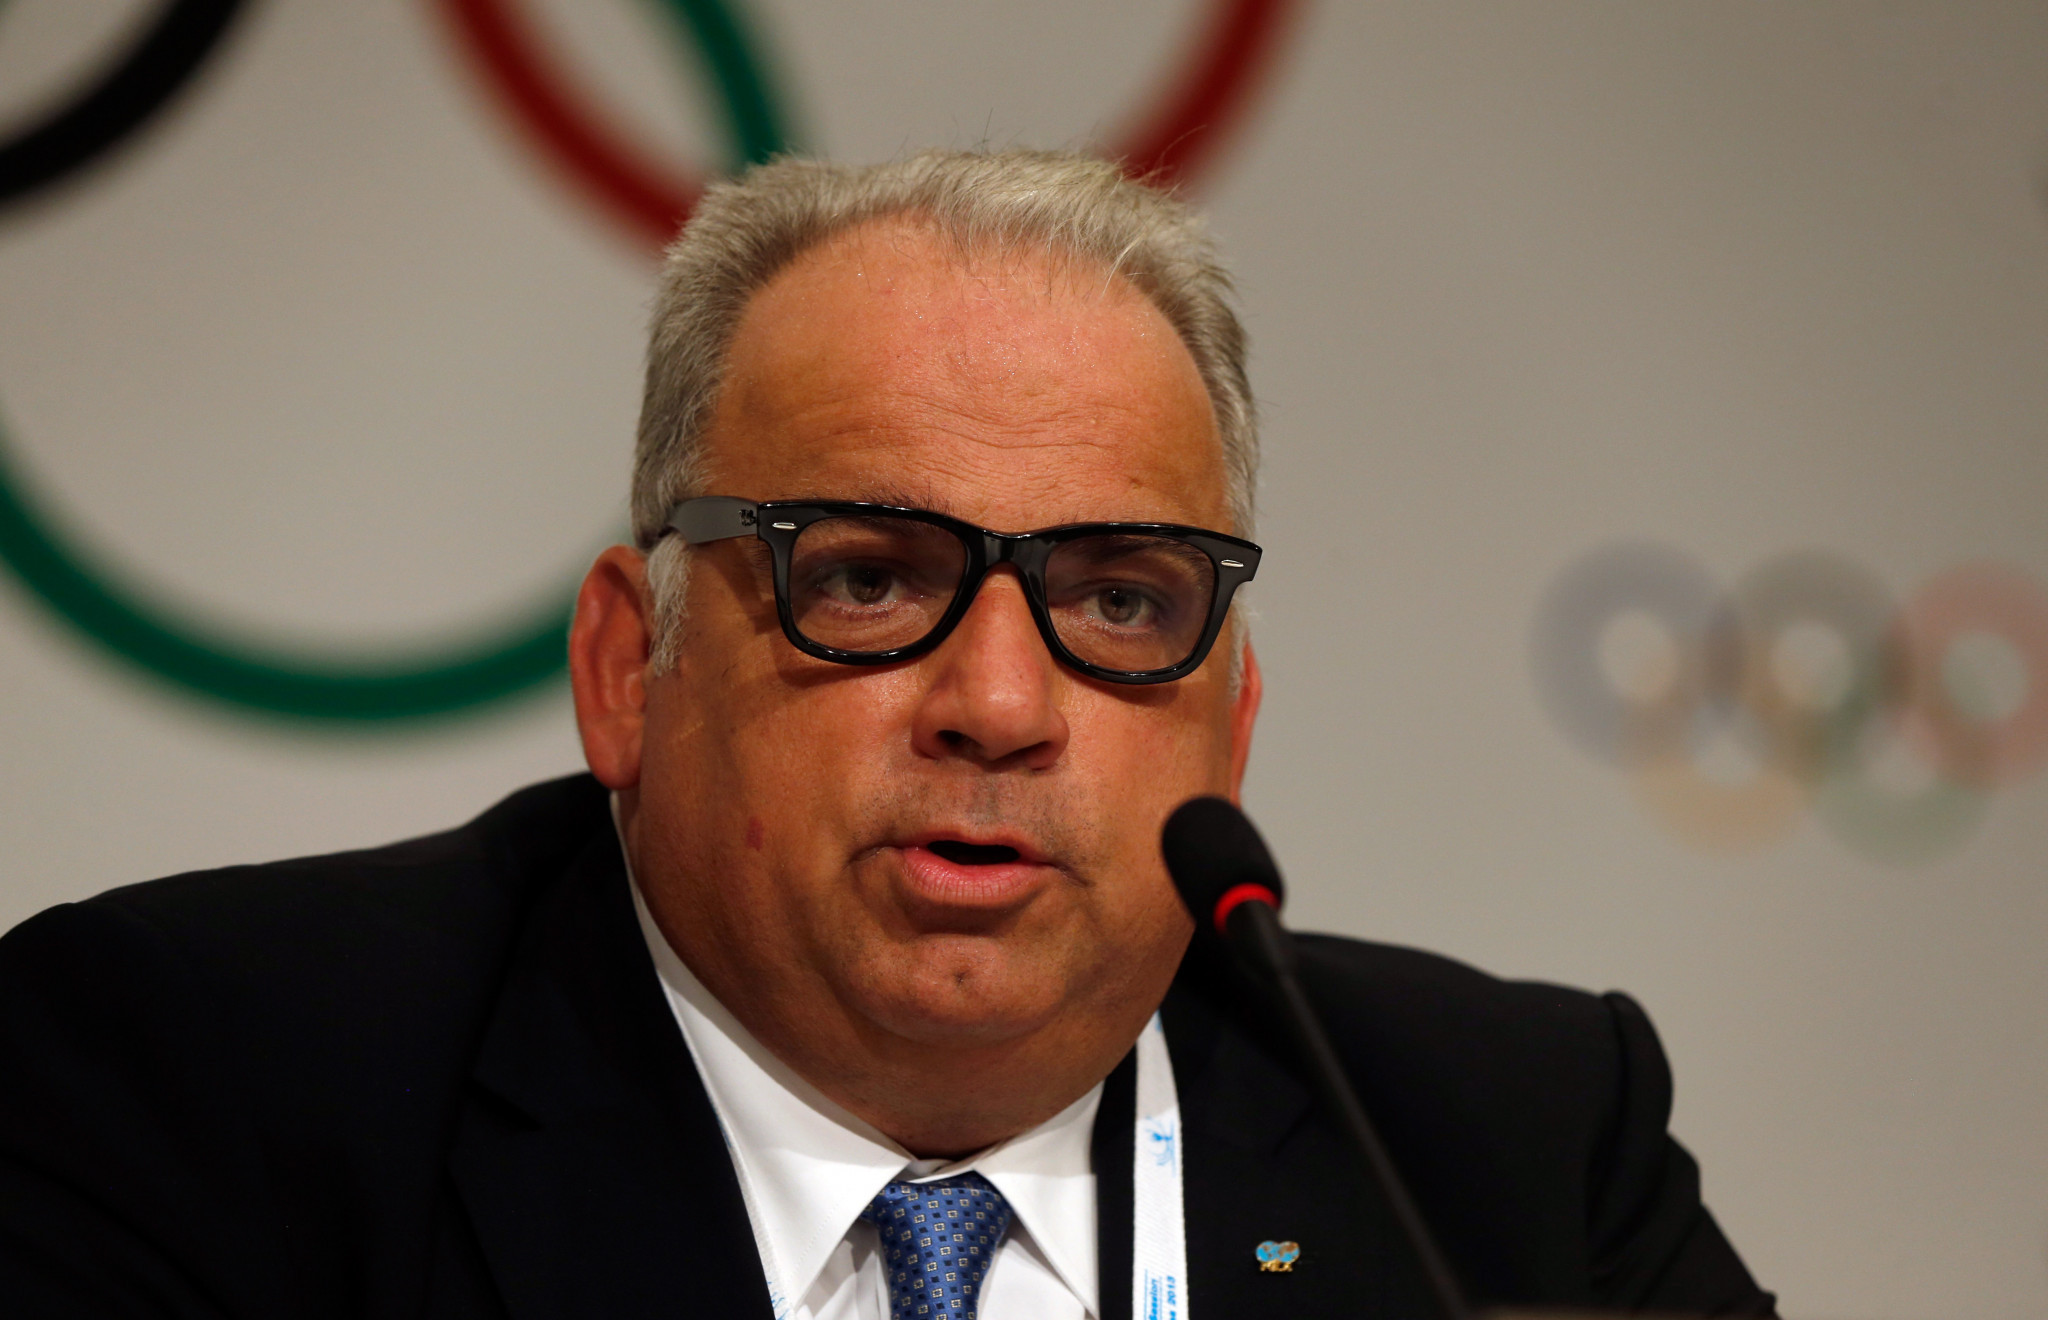 IOC Executive Board member Nenad Lalovic has backed calls for an investigation into Beckie Scott's bullying claims ©Getty Images